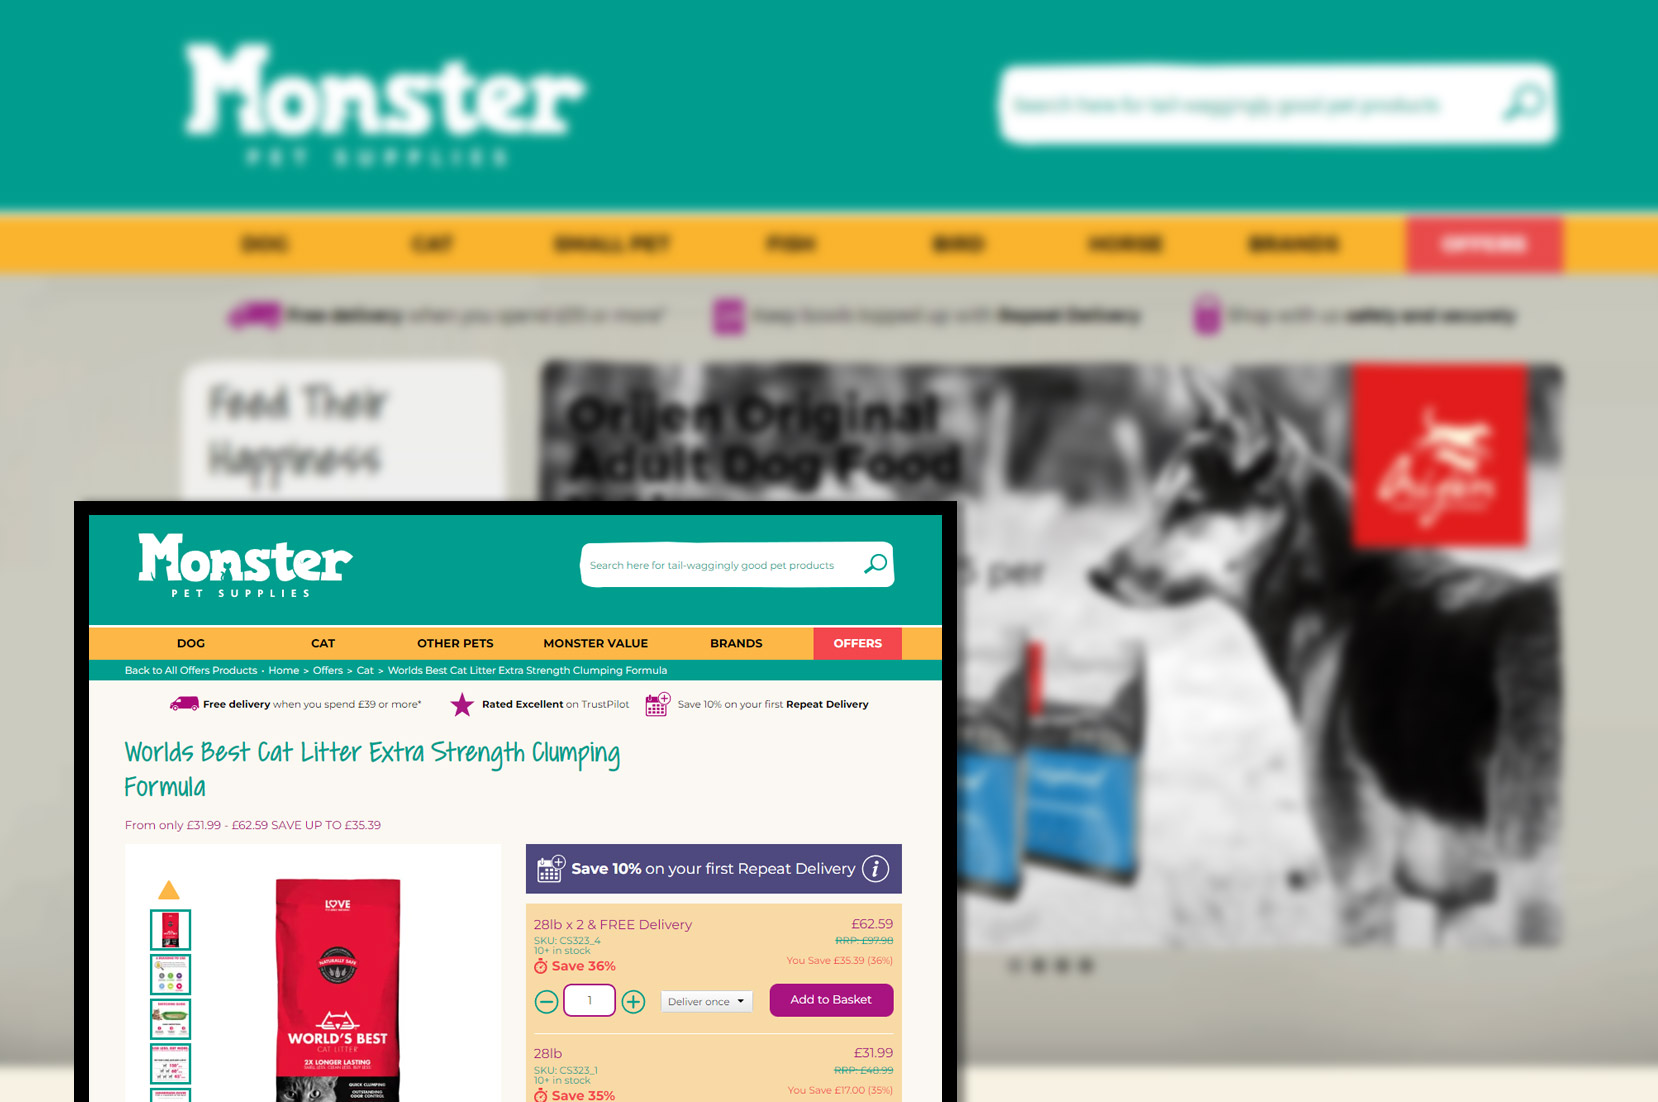 monsterpetsupplies-co-ukproduct-pricing-information-and-image-scraping-services